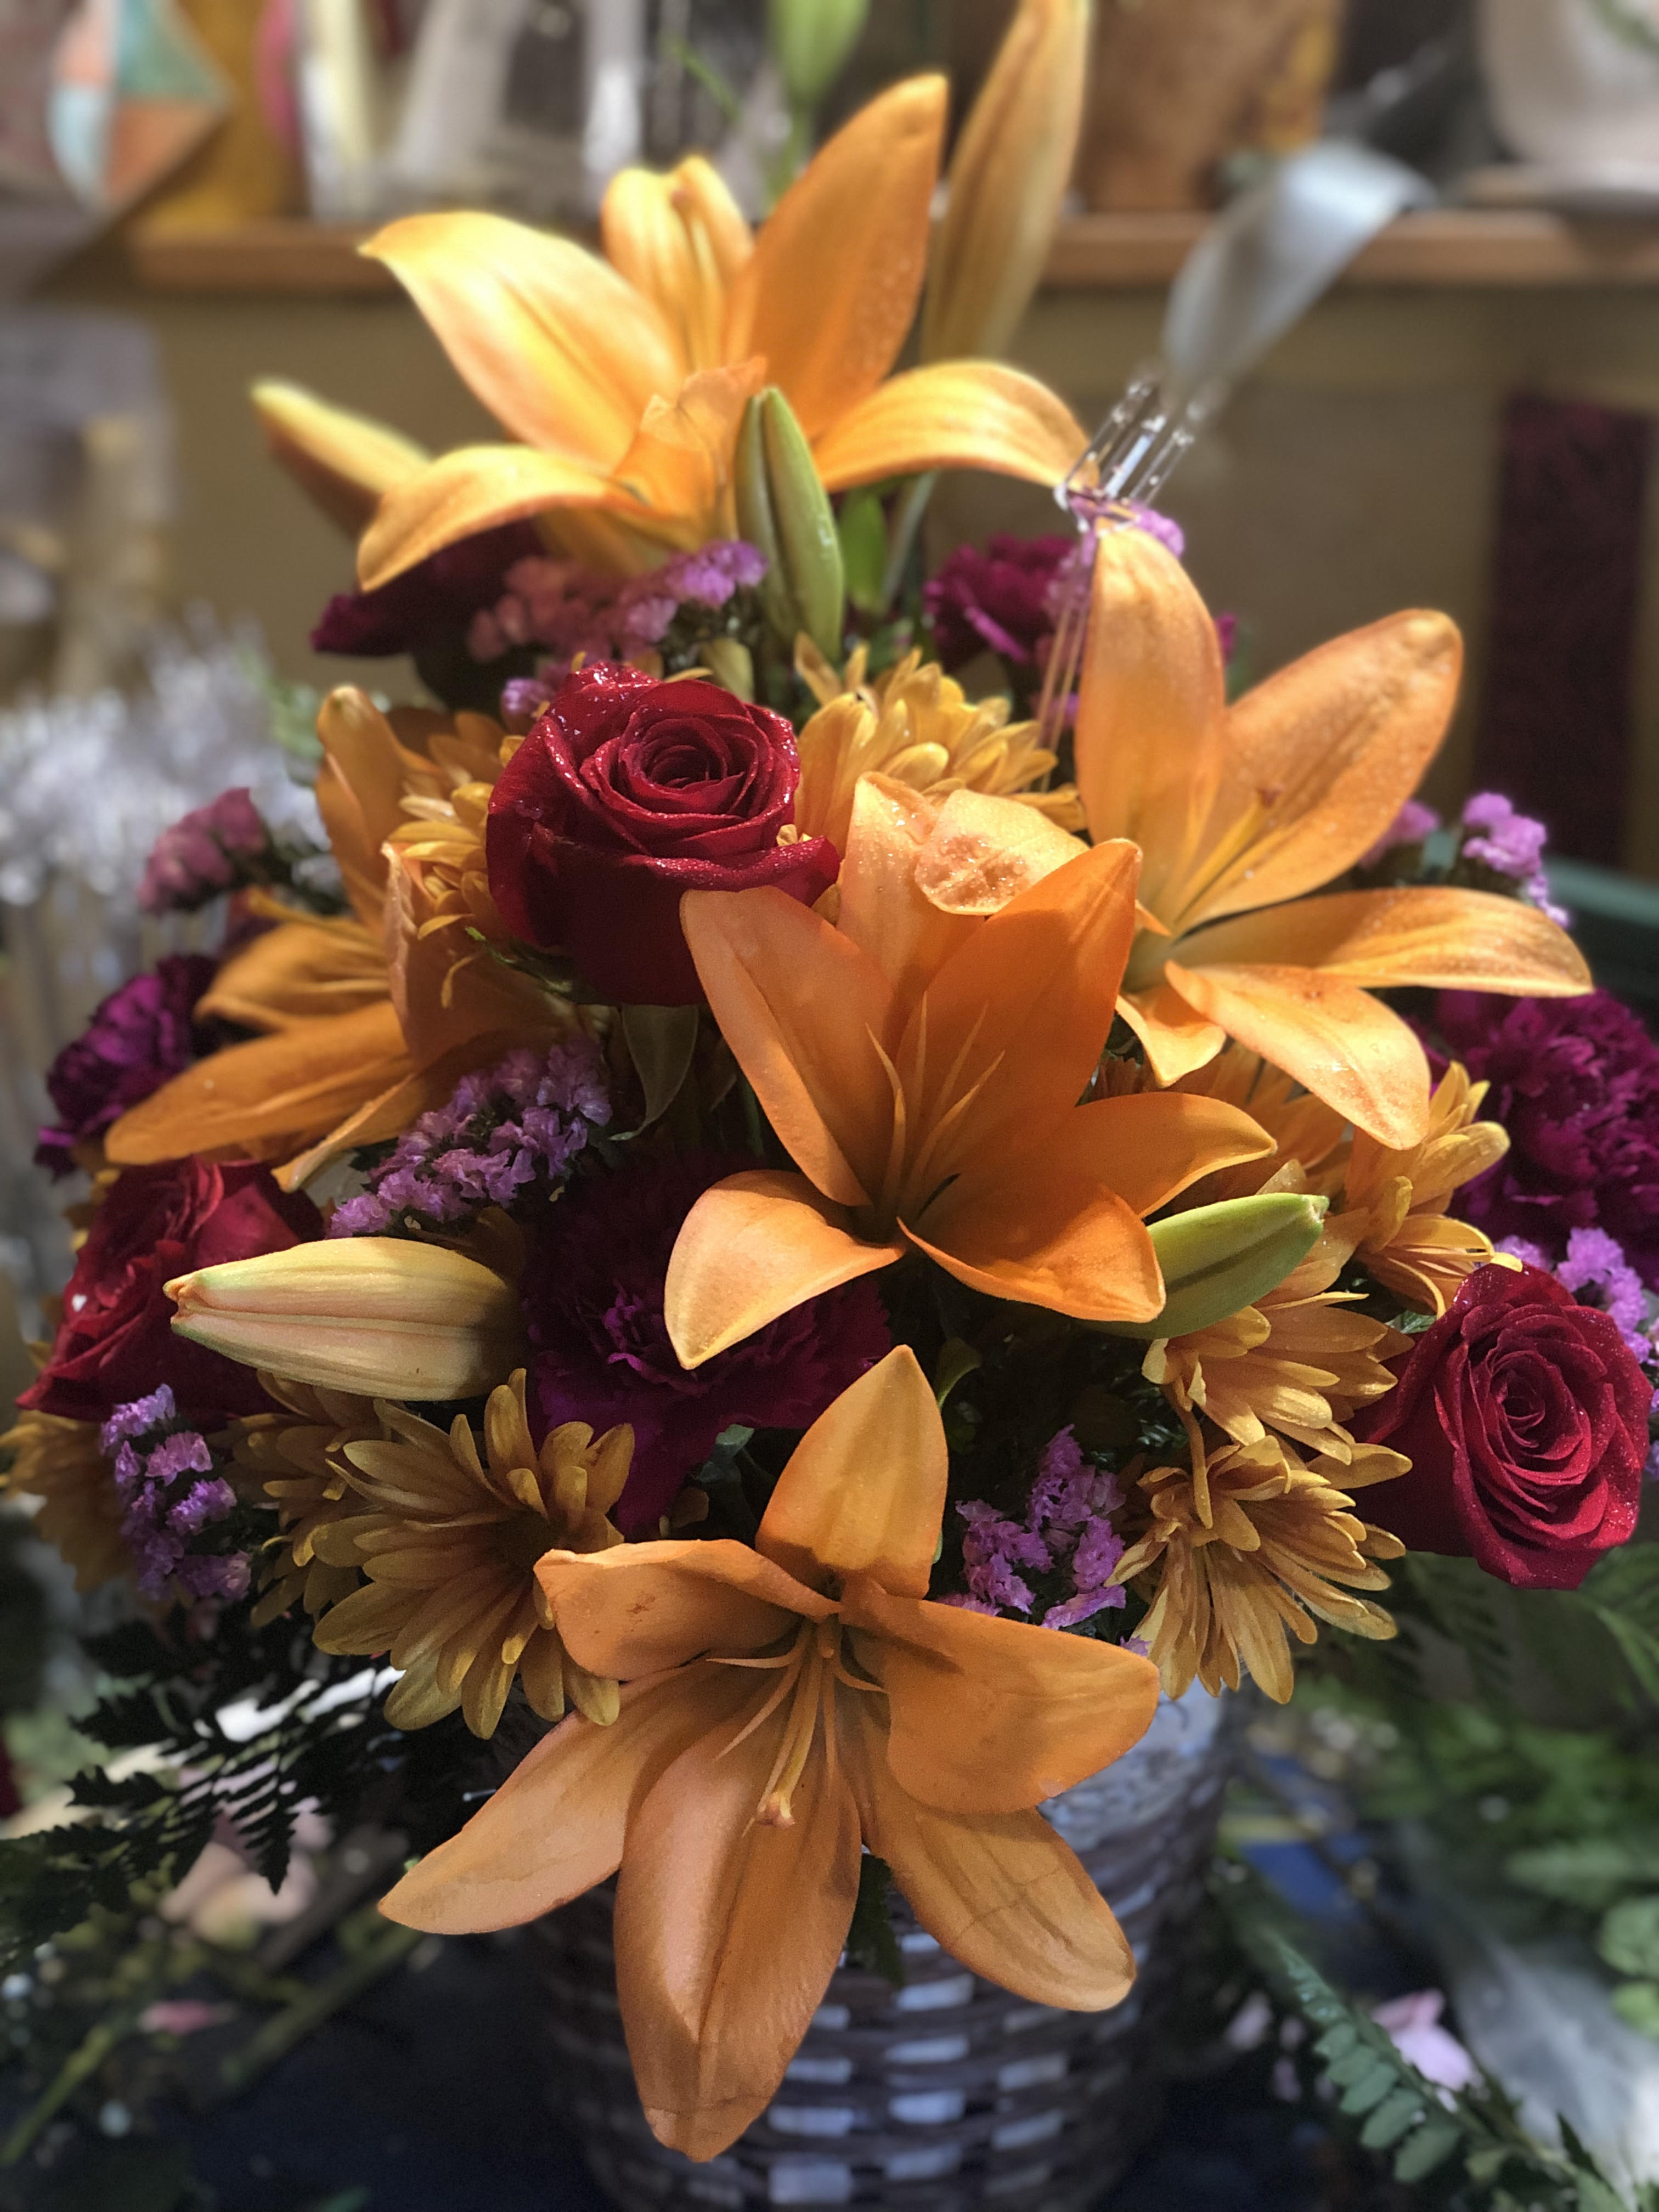 Lily Oh' Lily - Lily Oh' Lily - who wouldnt love to get such a beautiful bouquet - any occasion is perfect for this perfect mix of jewel tones of fresh blooms - (our lilies are so fresh some of the blooms may still be tight buds upon arrival)